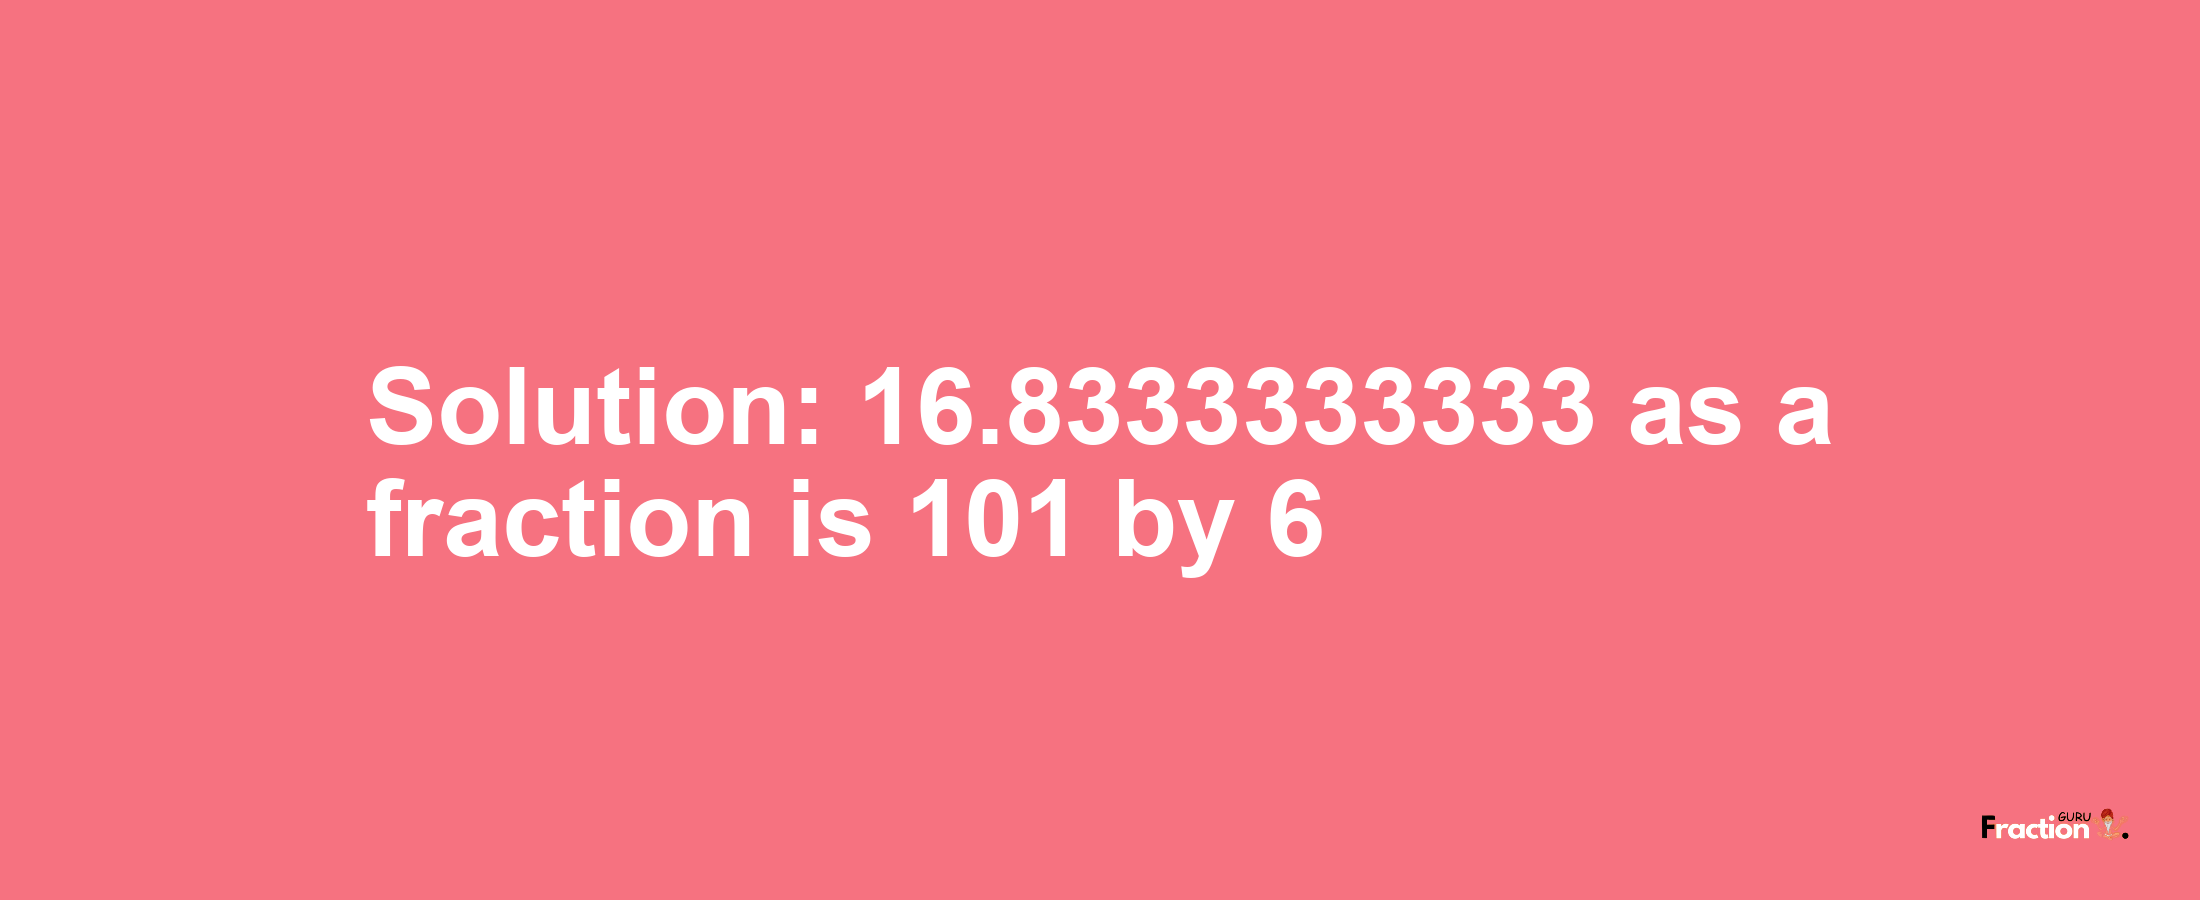 Solution:16.8333333333 as a fraction is 101/6